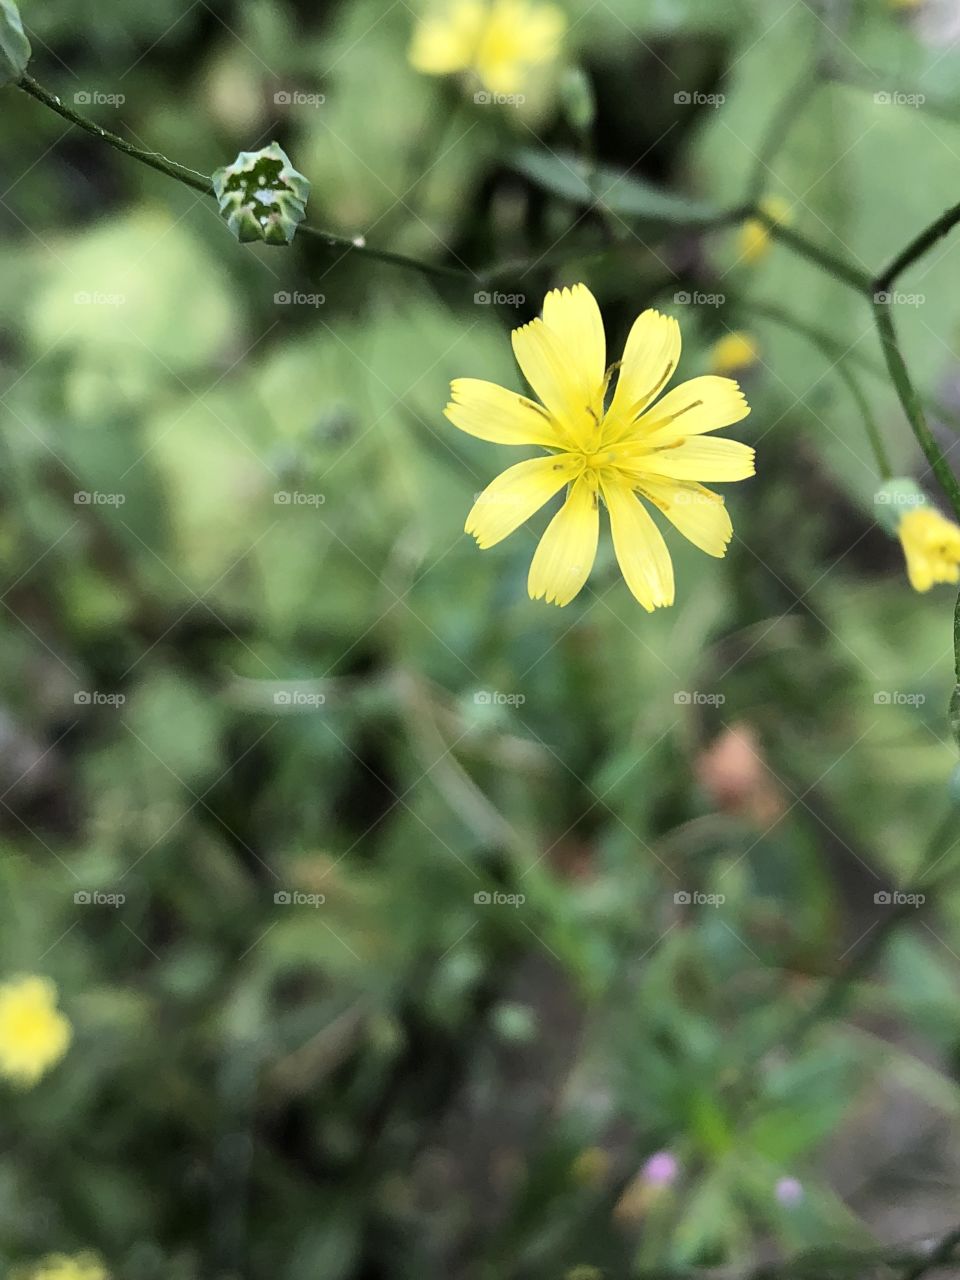 Small yellow flowers 2